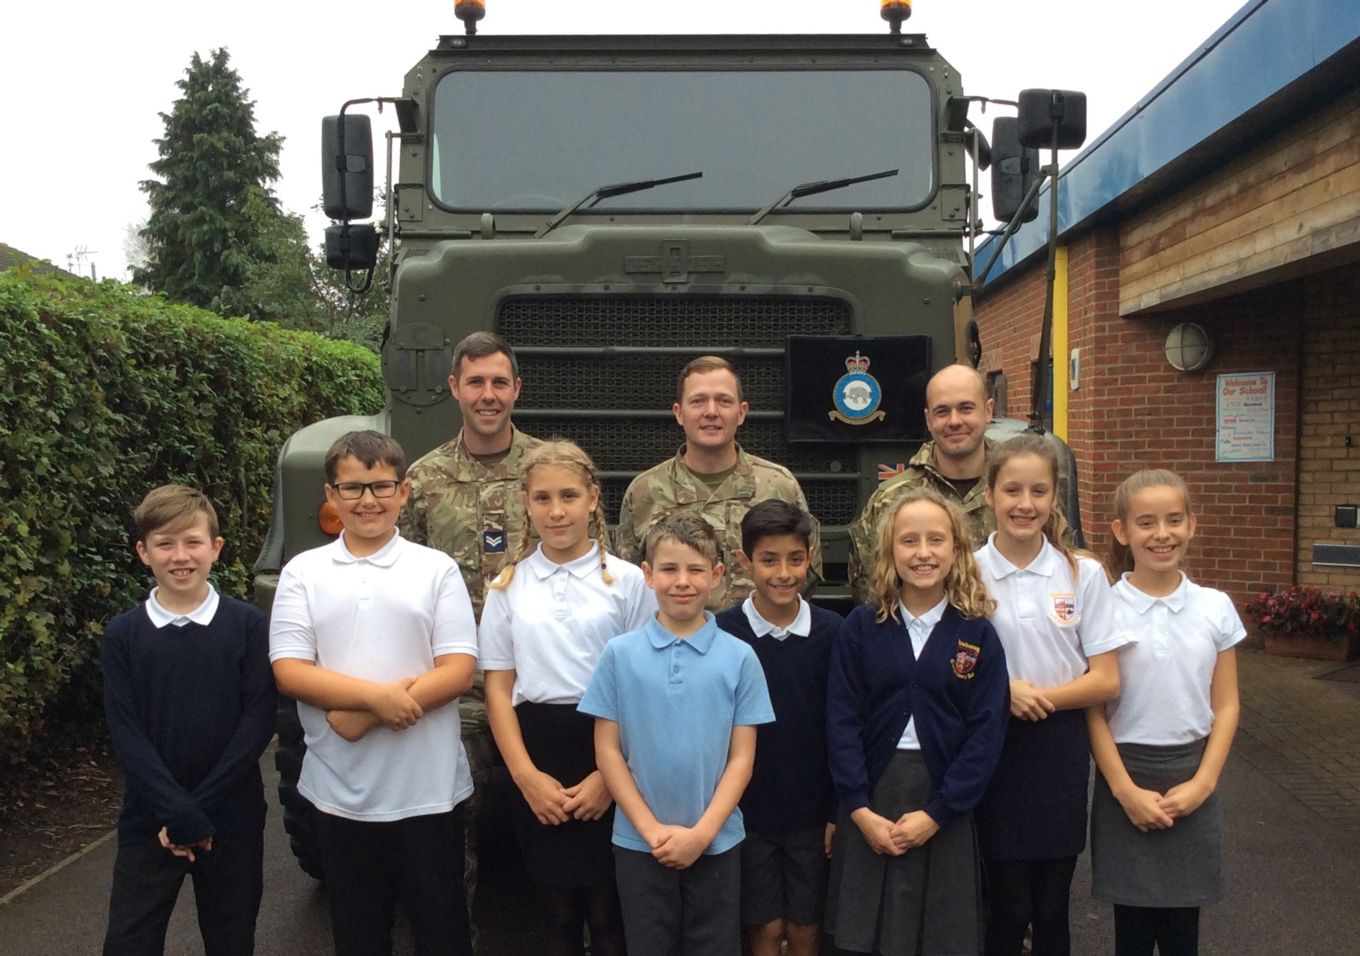 From left to right: Cpl Phillip Kapler, Sgt Terry Littler, SAC Luke Palmer with pupils from Newborough CE Primary School.